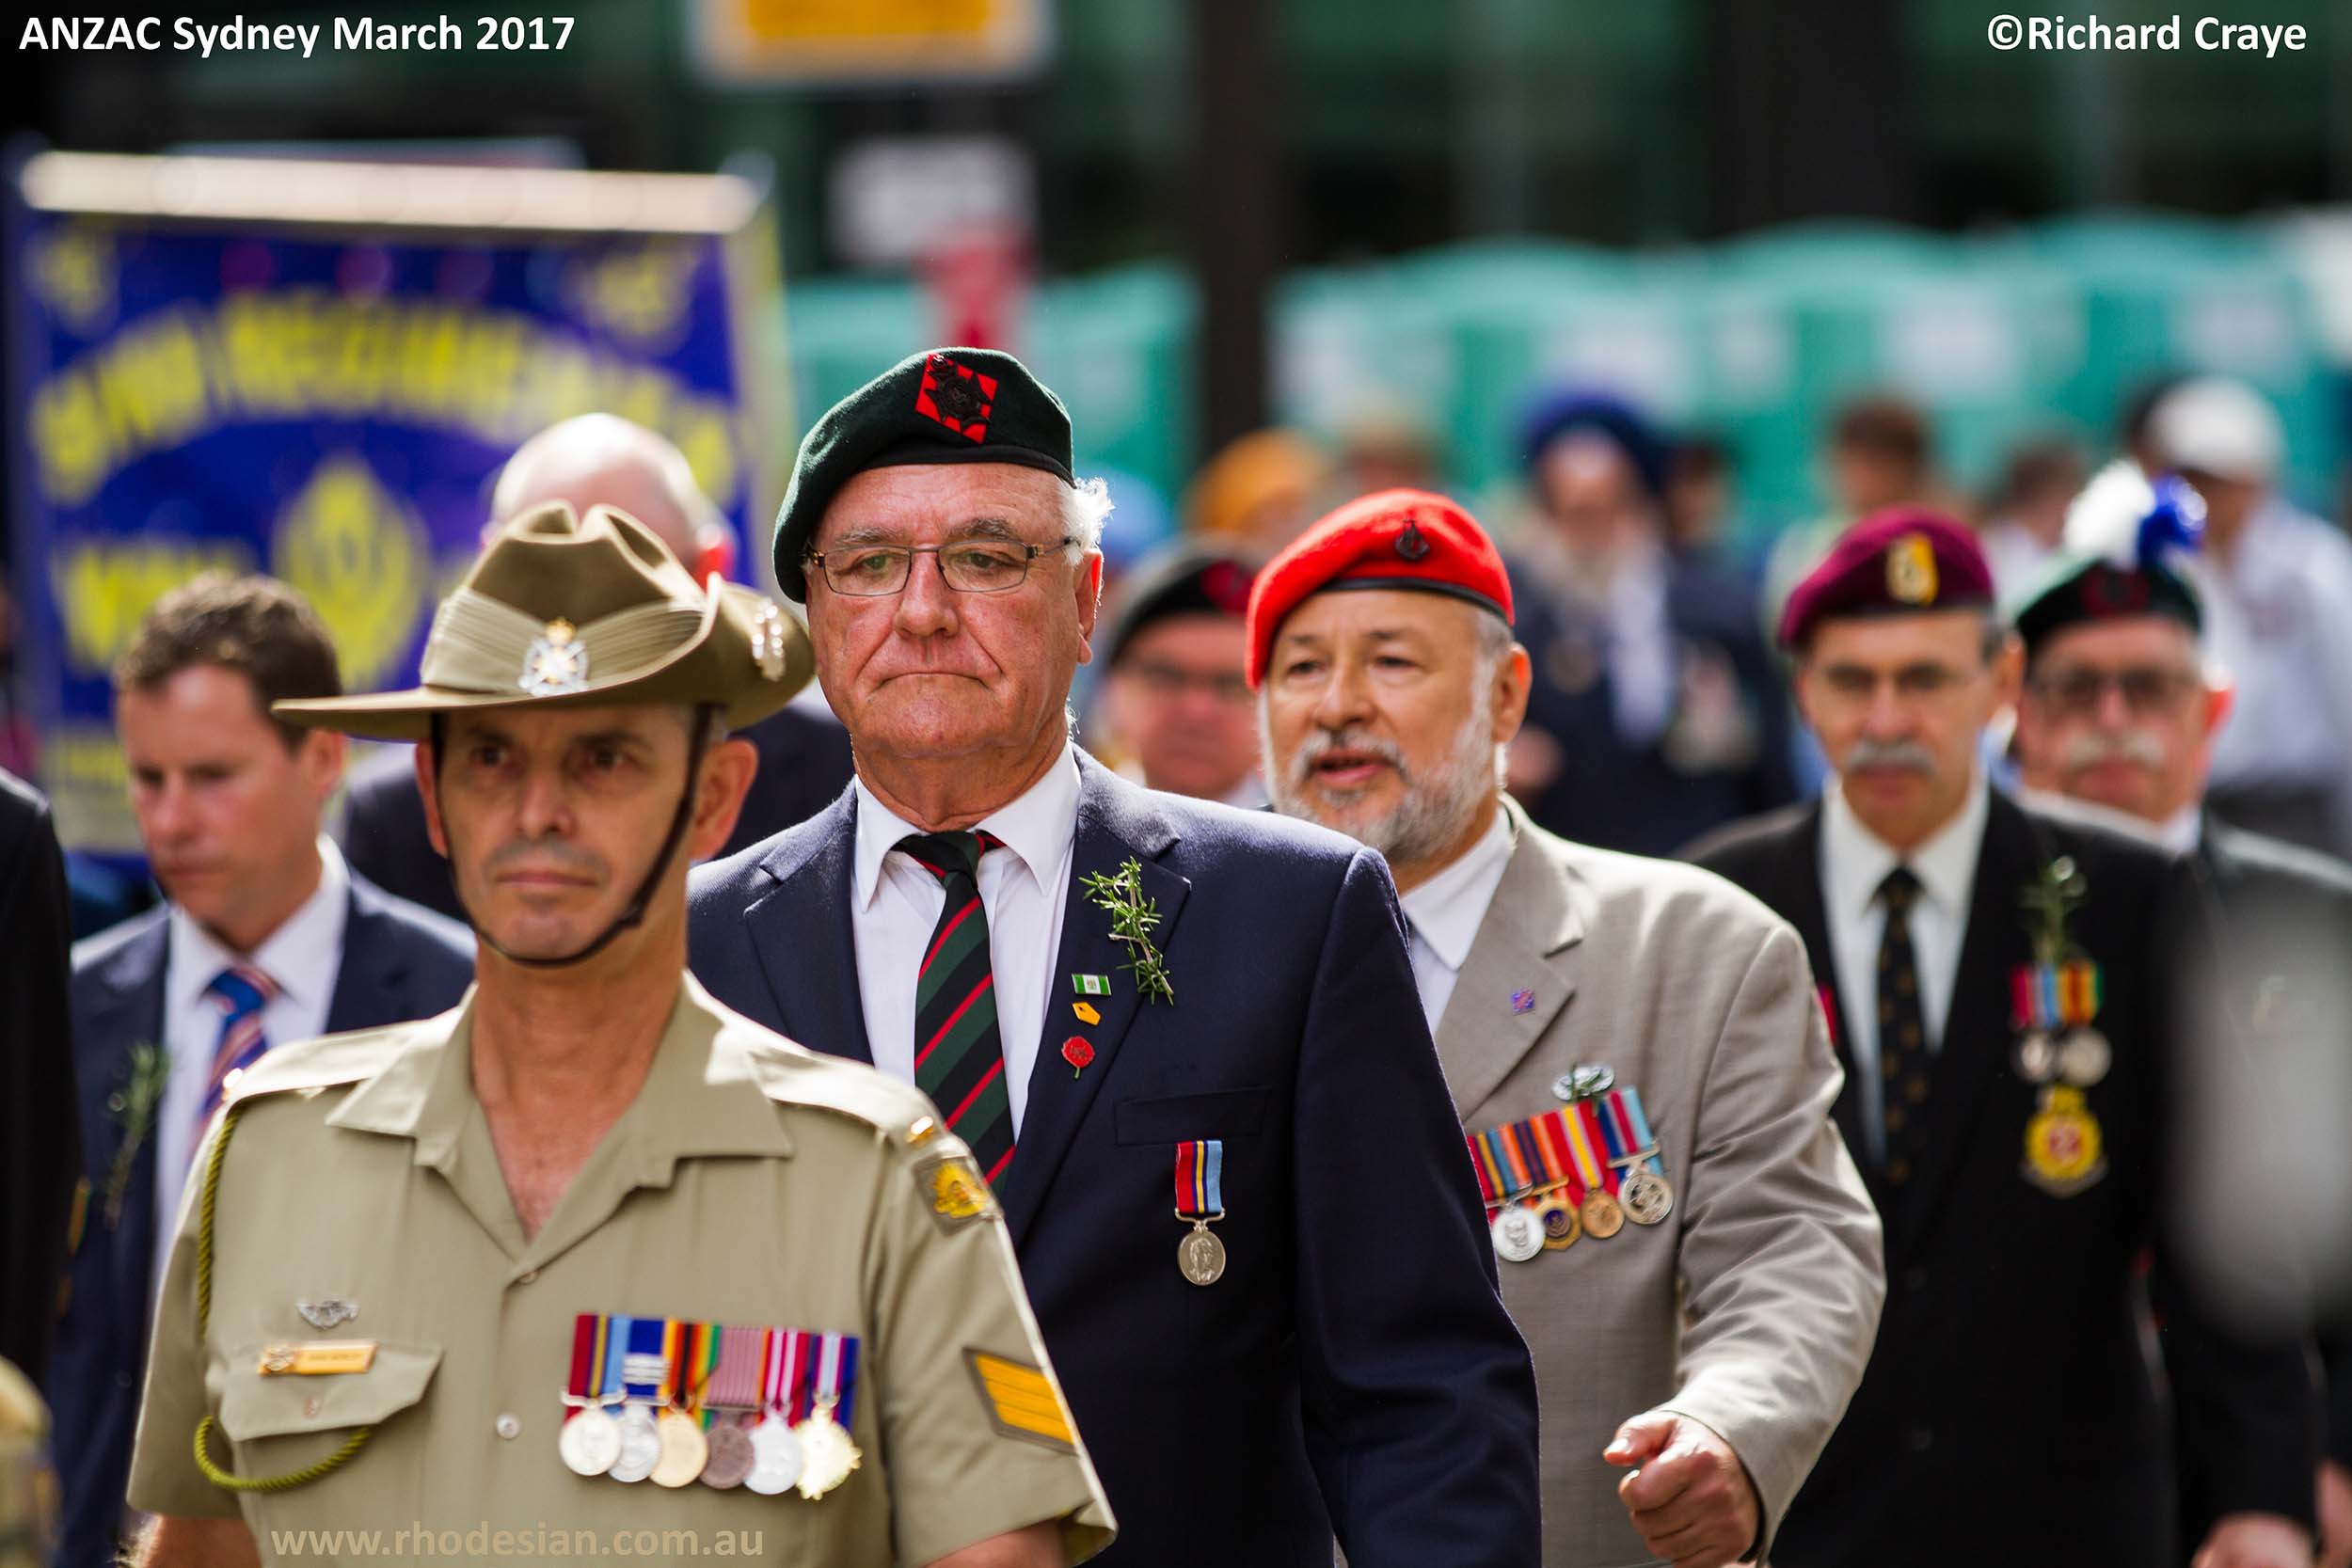 Australian reserve member with Rhodesian veterans in ANZAC Day March in Sydney in 2017 posted on www.rhodesian.com.au